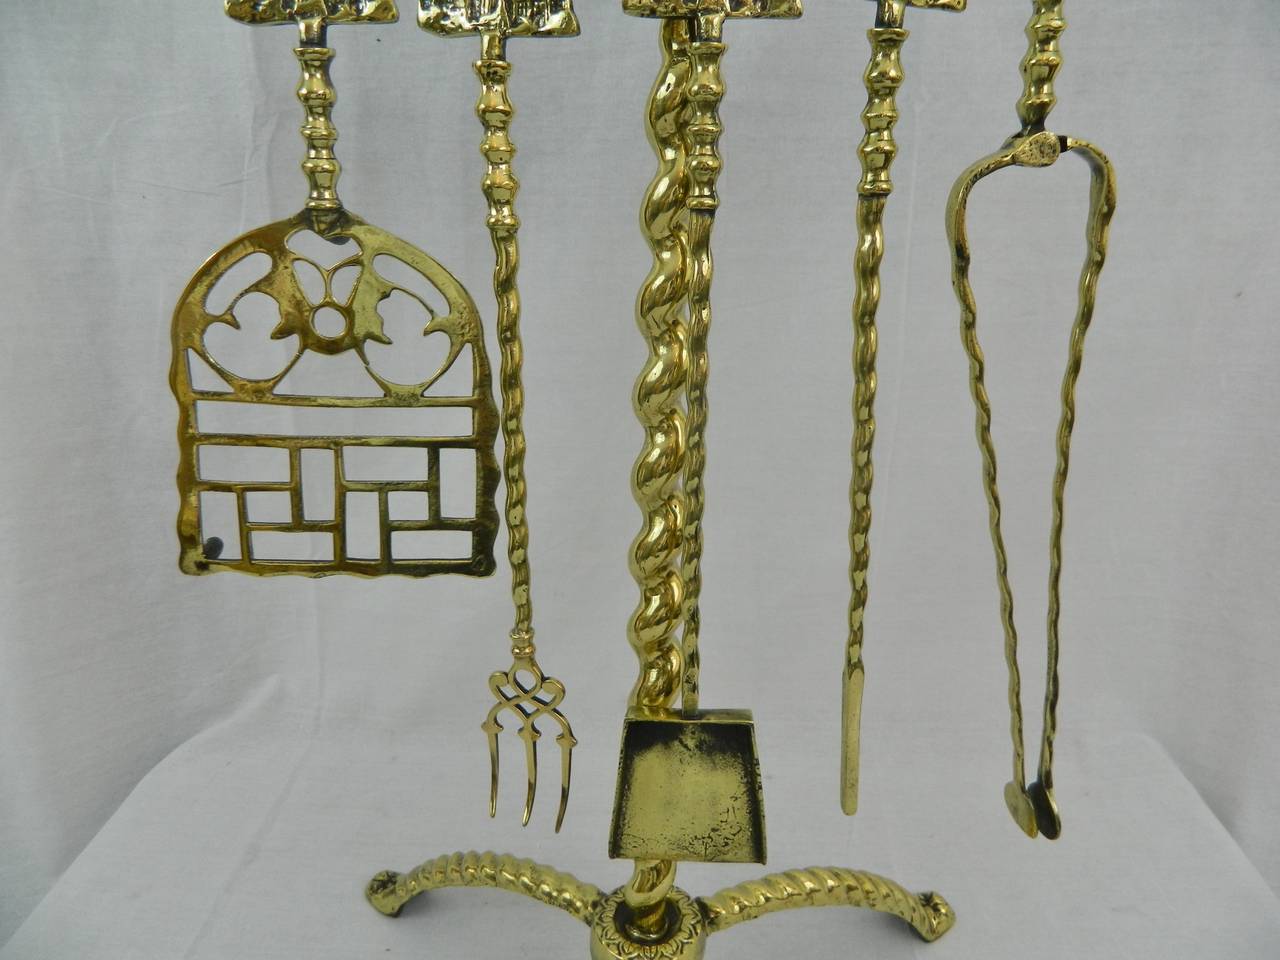 Polished Brass Windmill Design Set of Five Fireplace Tools, 19th Century In Good Condition For Sale In Savannah, GA